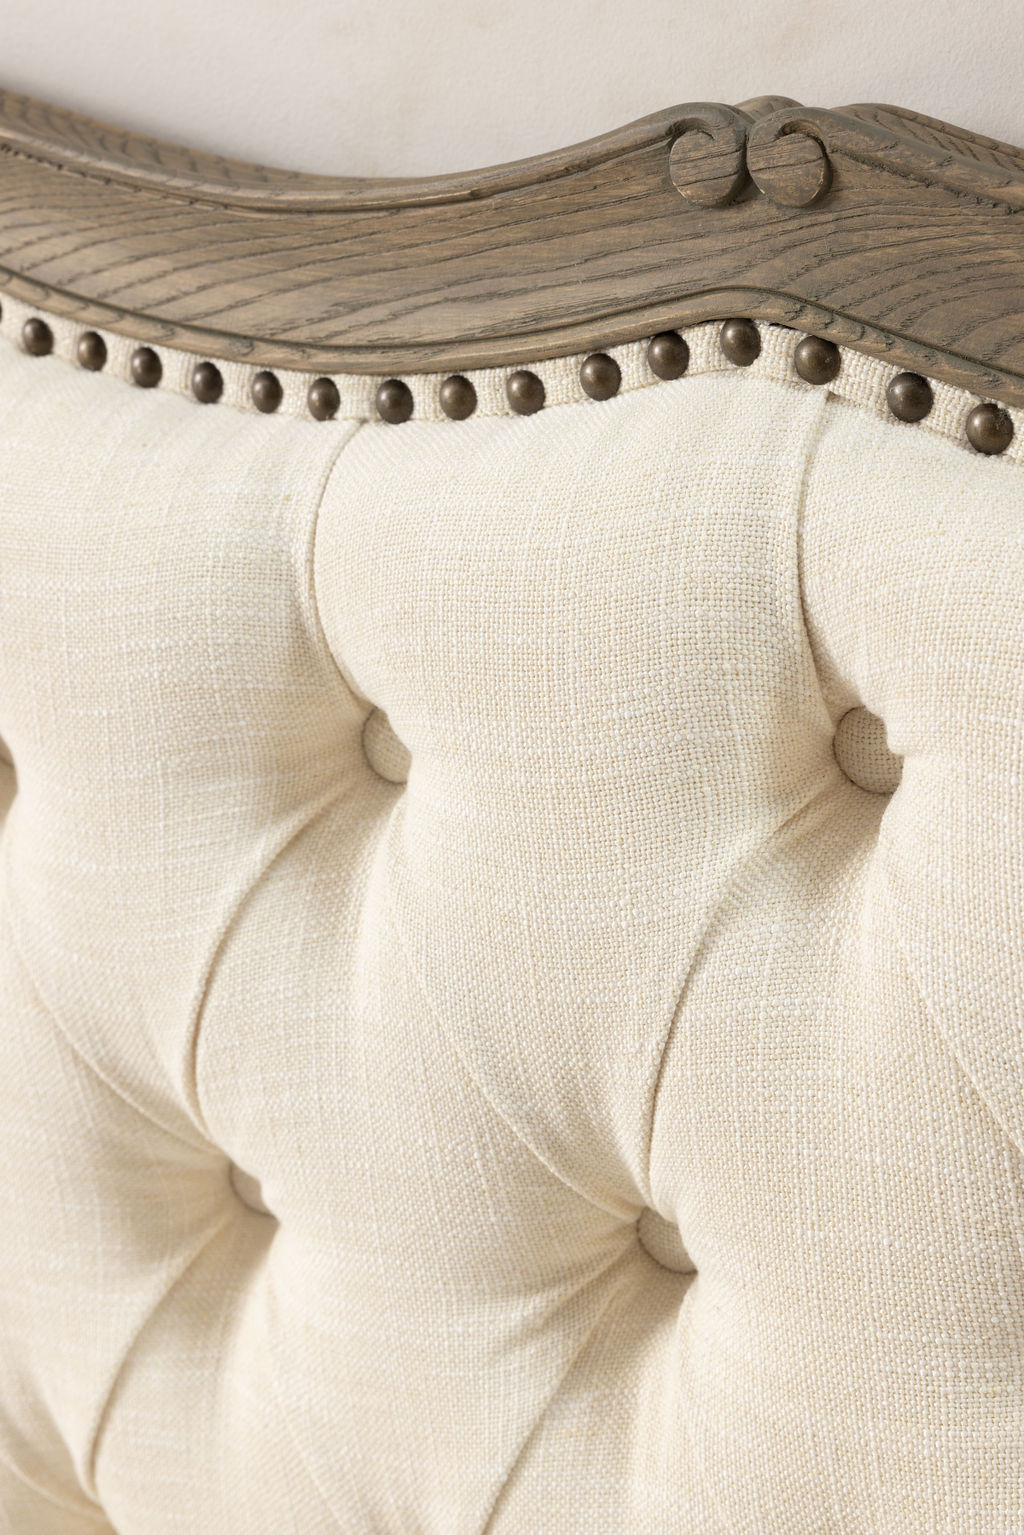 French style queen headboard in cream Château Collection 